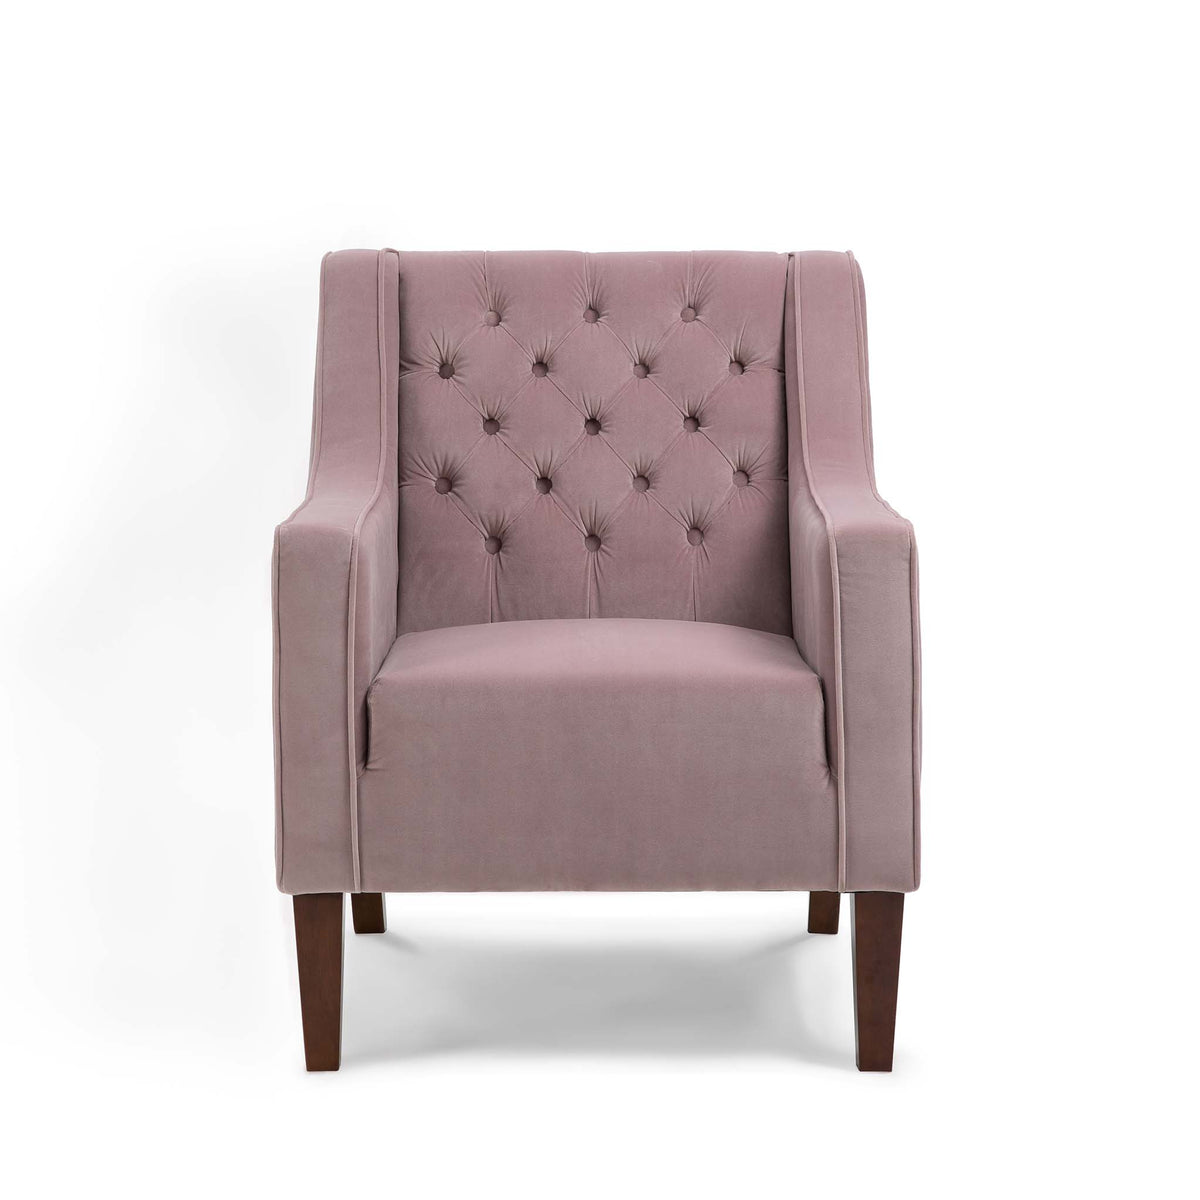 Eliza Heather Chesterfield Arm Chair by Roseland Furniture